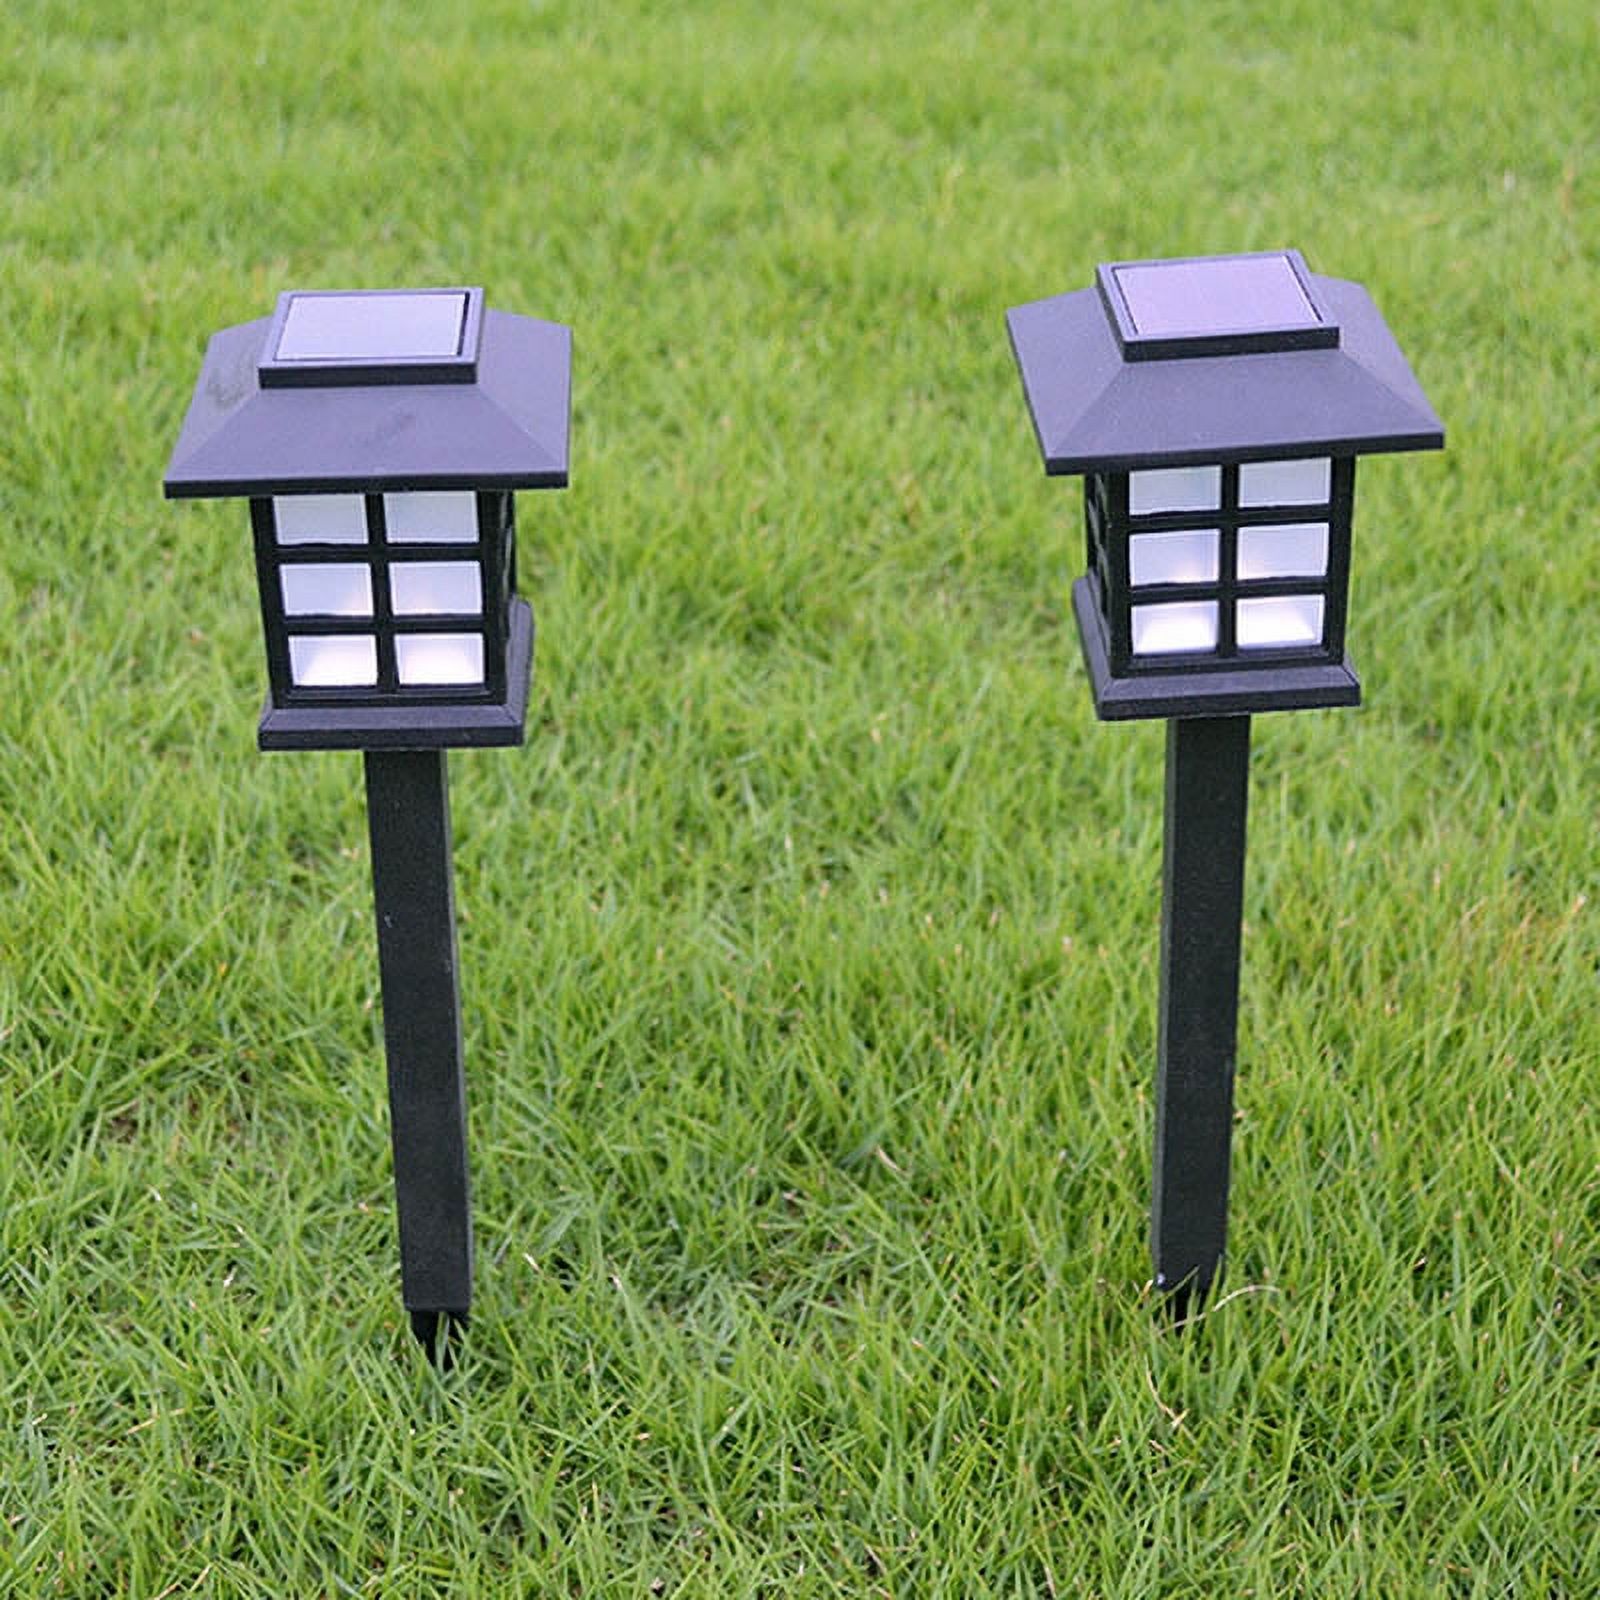 2 Pcs Solar Pathway Lights Outdoor LED Solar Powered Garden Lights for Lawn Patio Yard;2 Pcs Solar Pathway Lights Outdoor LED Solar Powered Garden Lights - image 5 of 9